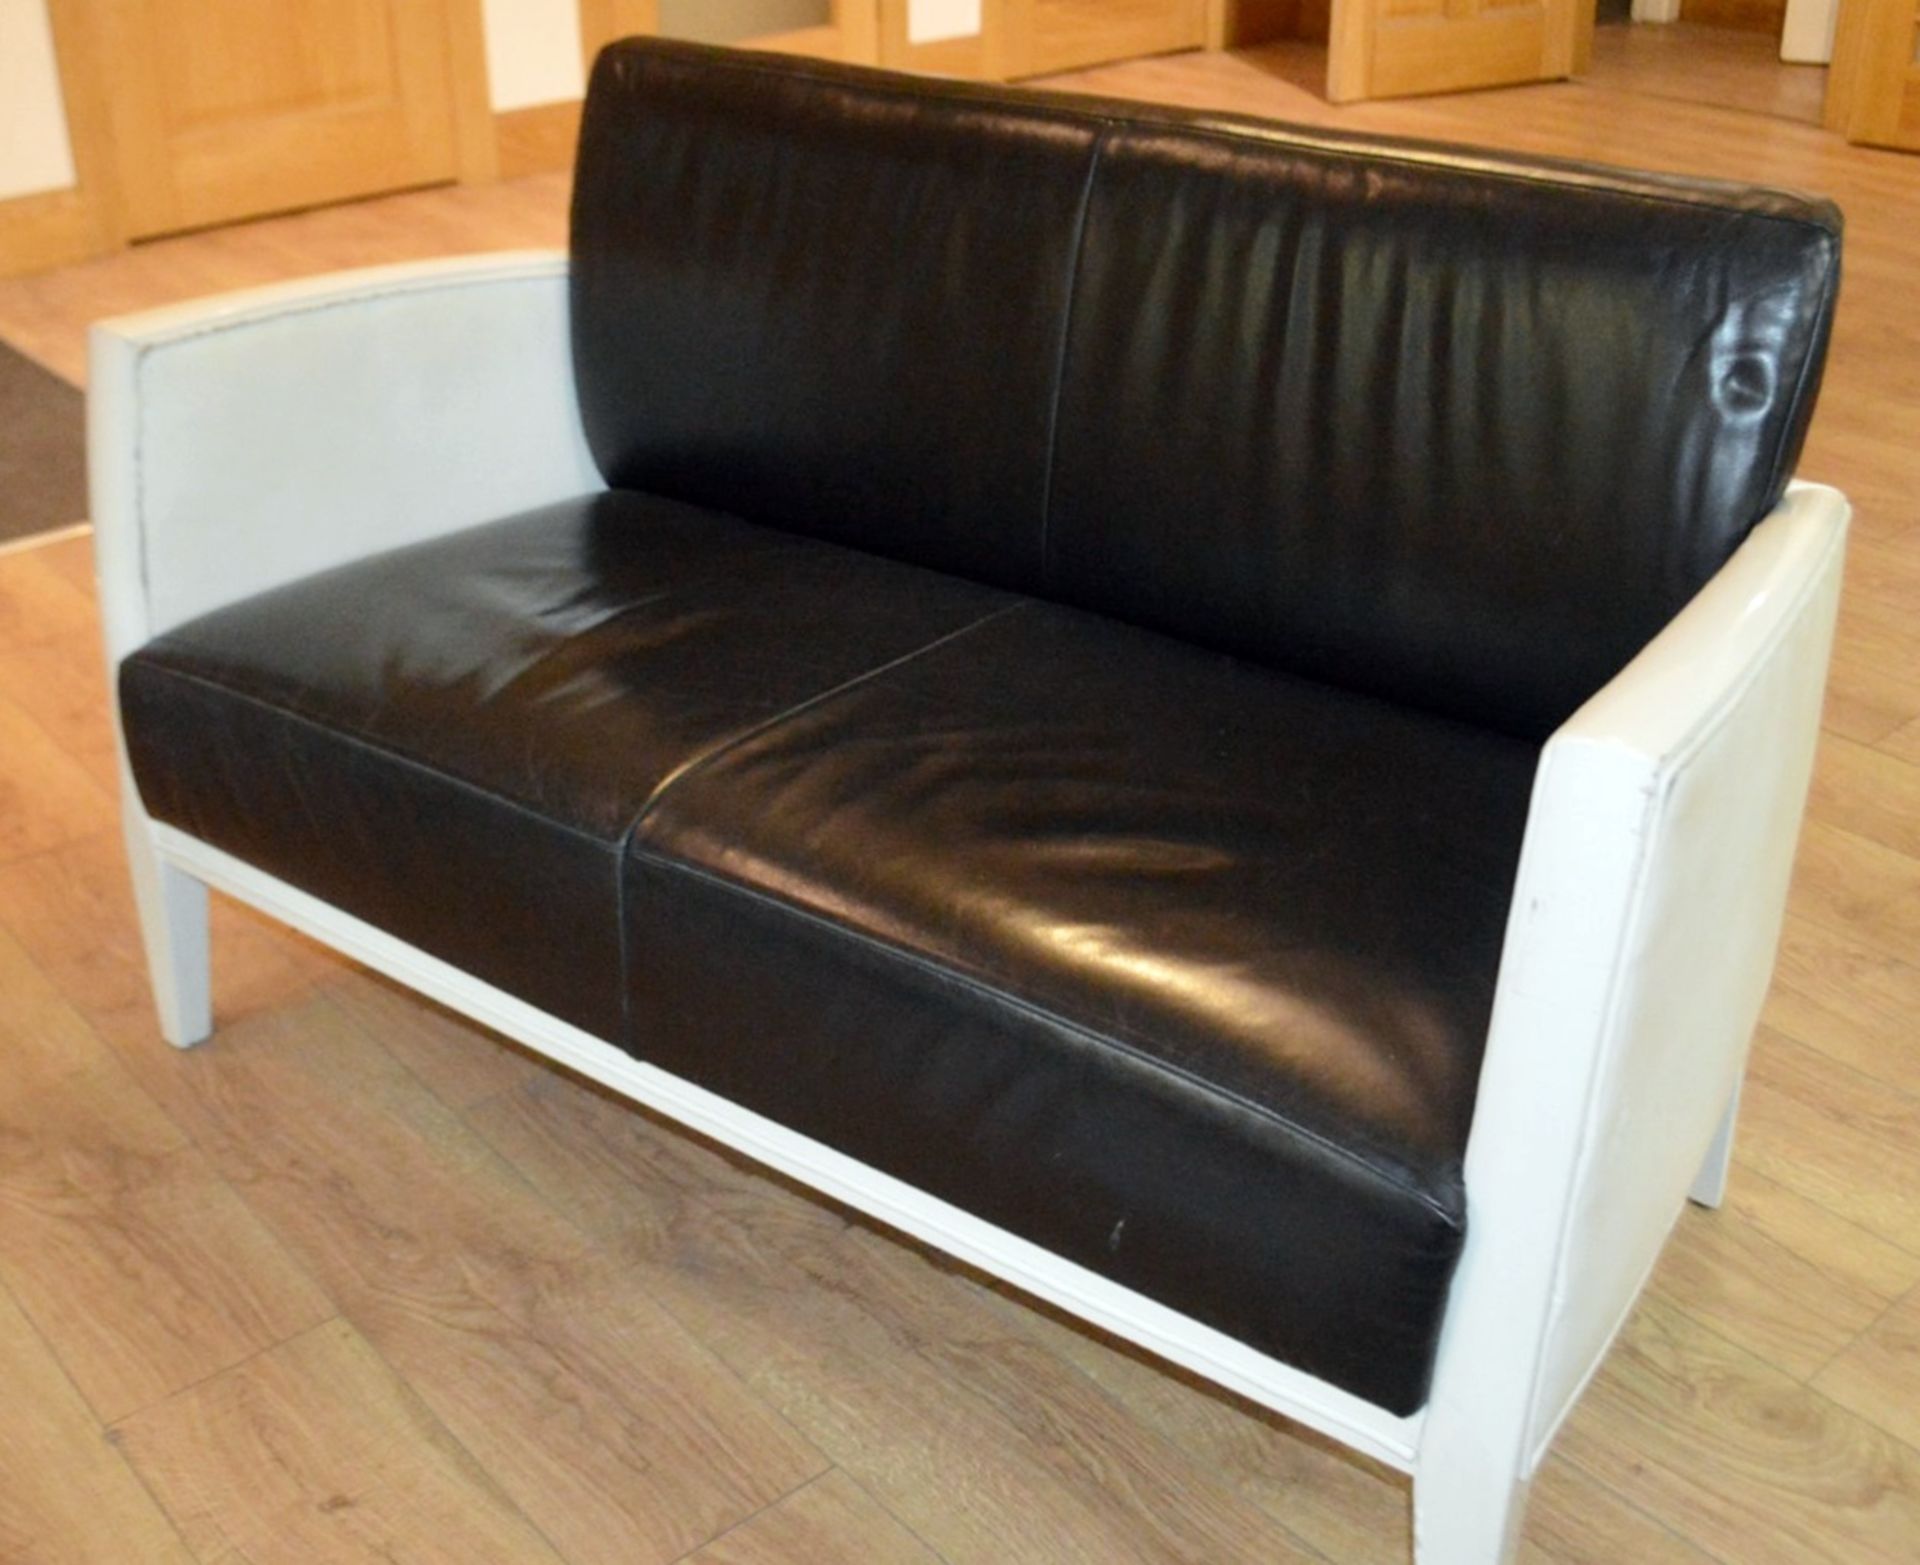 1 x Stylish Commercial Leather Upholstered 2-Seater Sofa With A High-Gloss Patent-Style Finish - Image 2 of 6